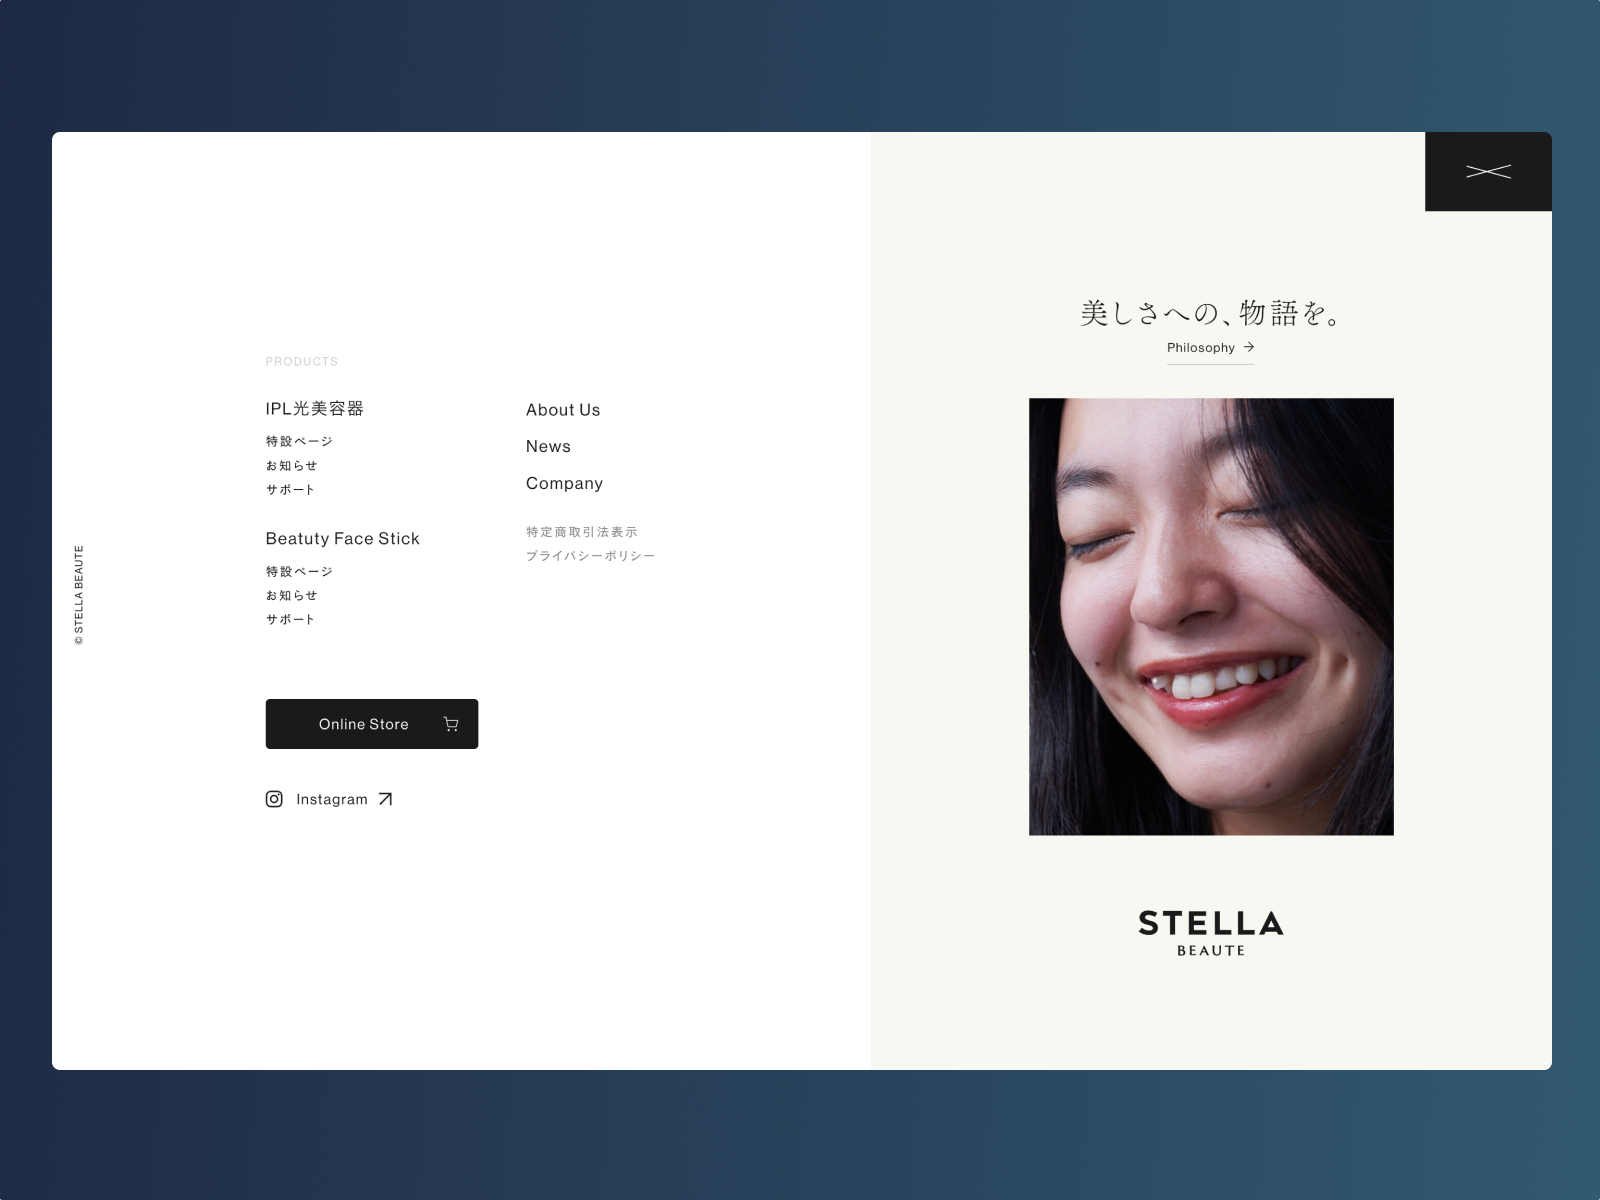 STELLA BEAUTE - Awwwards Honorable Mention